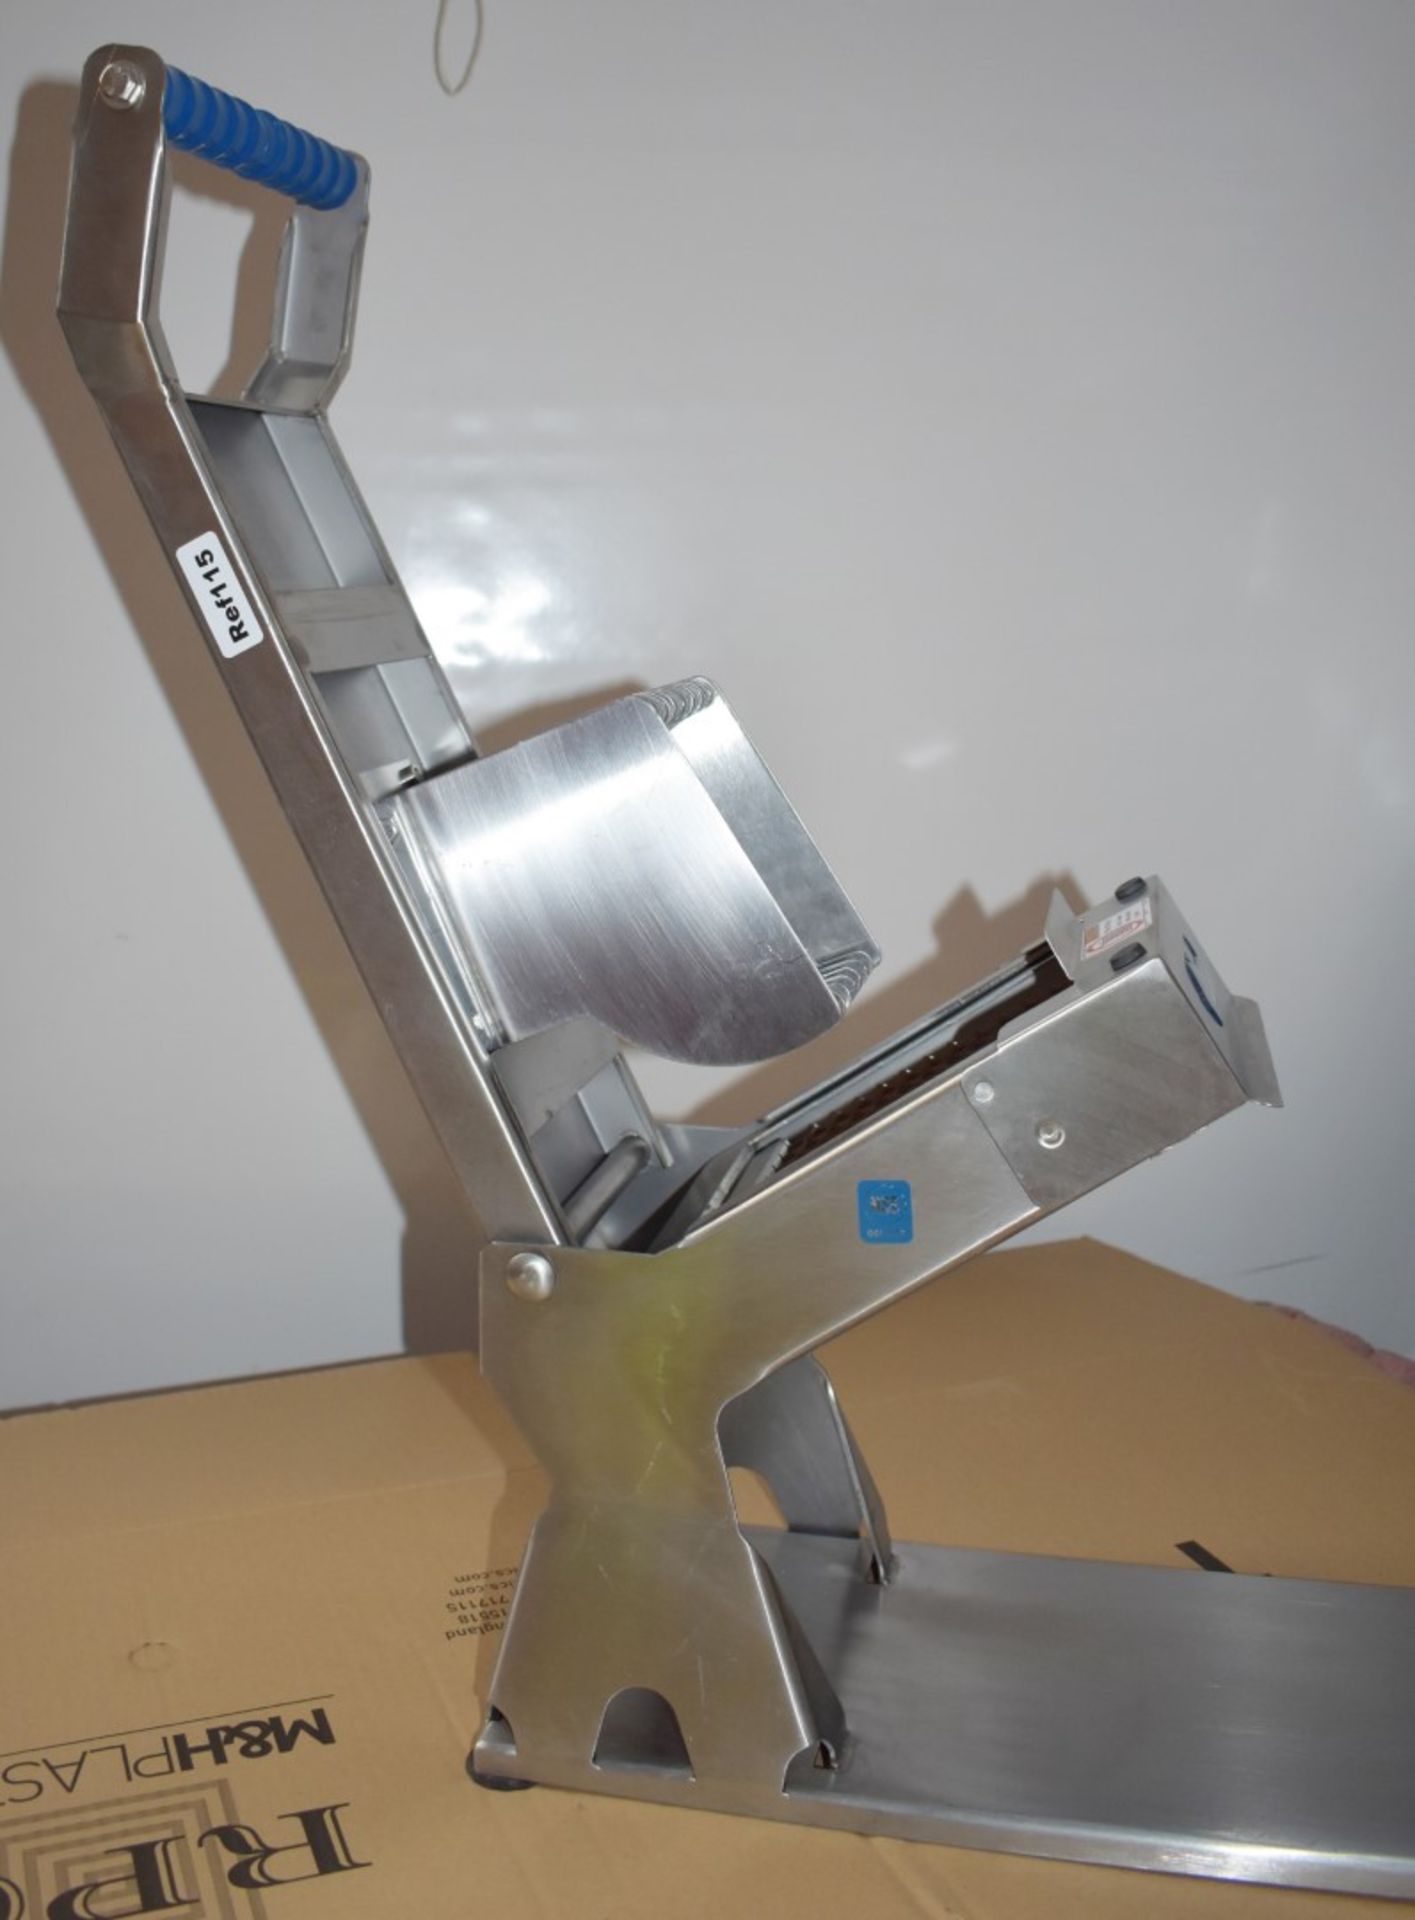 1 x Edlund XL-125 ARC Manual Fruit and Vegetable Slicer With Blades - CL232 - Ref115 - Location: - Image 7 of 11